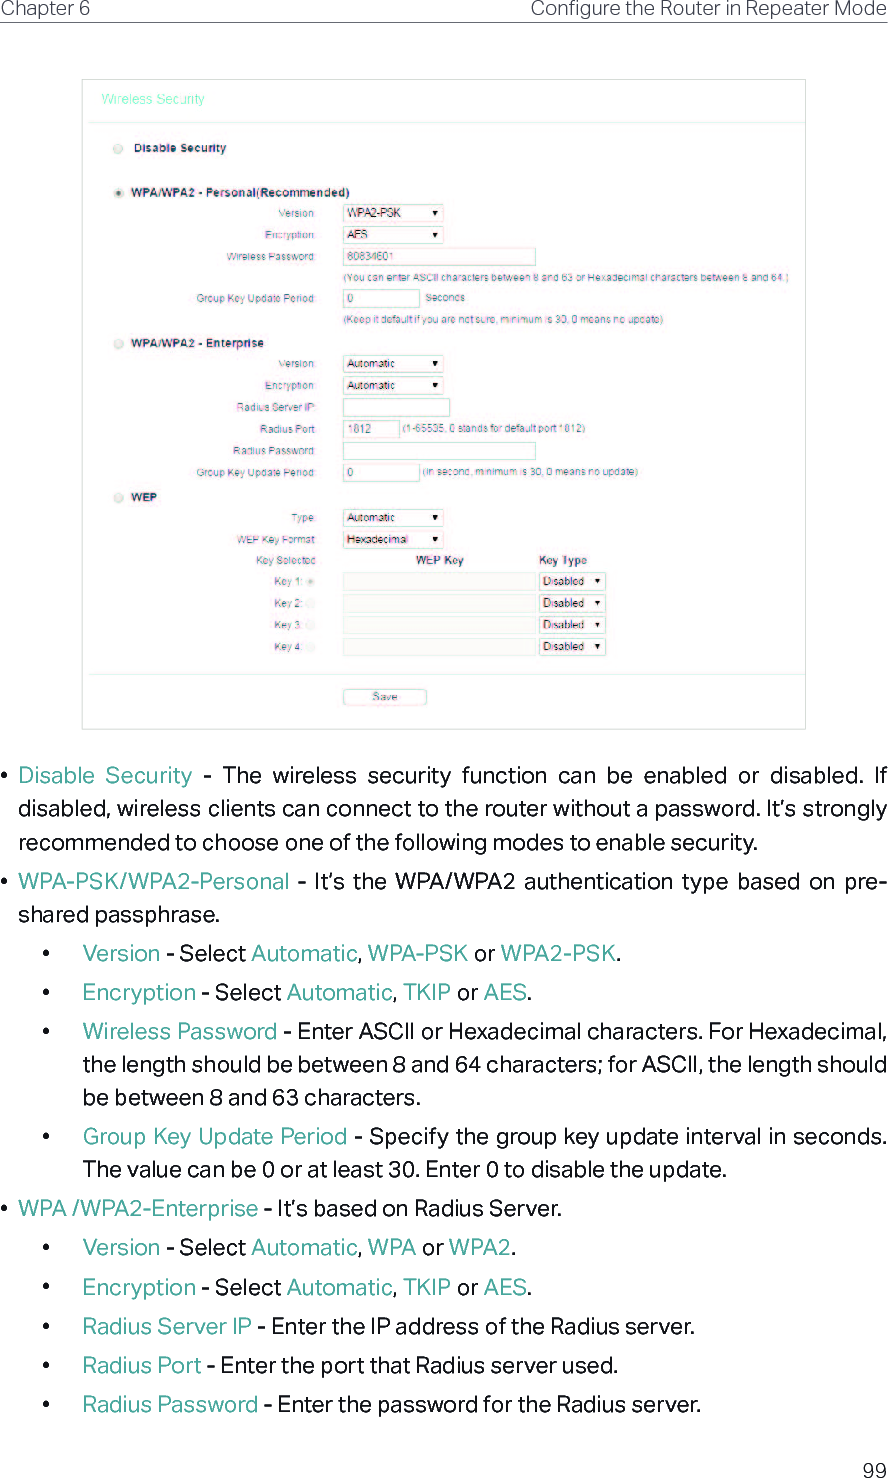 99Chapter 6 &amp;RQƮJXUHWKH5RXWHULQ5HSHDWHU0RGH•  Disable  Security  -  The  wireless  security  function  can  be  enabled  or  disabled.  If disabled, wireless clients can connect to the router without a password. It’s strongly recommended to choose one of the following modes to enable security.•  WPA-PSK/WPA2-Personal  -  It’s  the  WPA/WPA2  authentication  type  based  on  pre-shared passphrase. •  Version - Select Automatic, WPA-PSK or WPA2-PSK.•  Encryption - Select Automatic, TKIP or AES.•  Wireless Password - Enter ASCII or Hexadecimal characters. For Hexadecimal, the length should be between 8 and 64 characters; for ASCII, the length should be between 8 and 63 characters.•  Group Key Update Period - Specify the group key update interval in seconds. The value can be 0 or at least 30. Enter 0 to disable the update.•  WPA /WPA2-Enterprise - It’s based on Radius Server.•  Version - Select Automatic, WPA or WPA2.•  Encryption - Select Automatic, TKIP or AES.•  Radius Server IP - Enter the IP address of the Radius server.•  Radius Port - Enter the port that Radius server used.•  Radius Password - Enter the password for the Radius server.